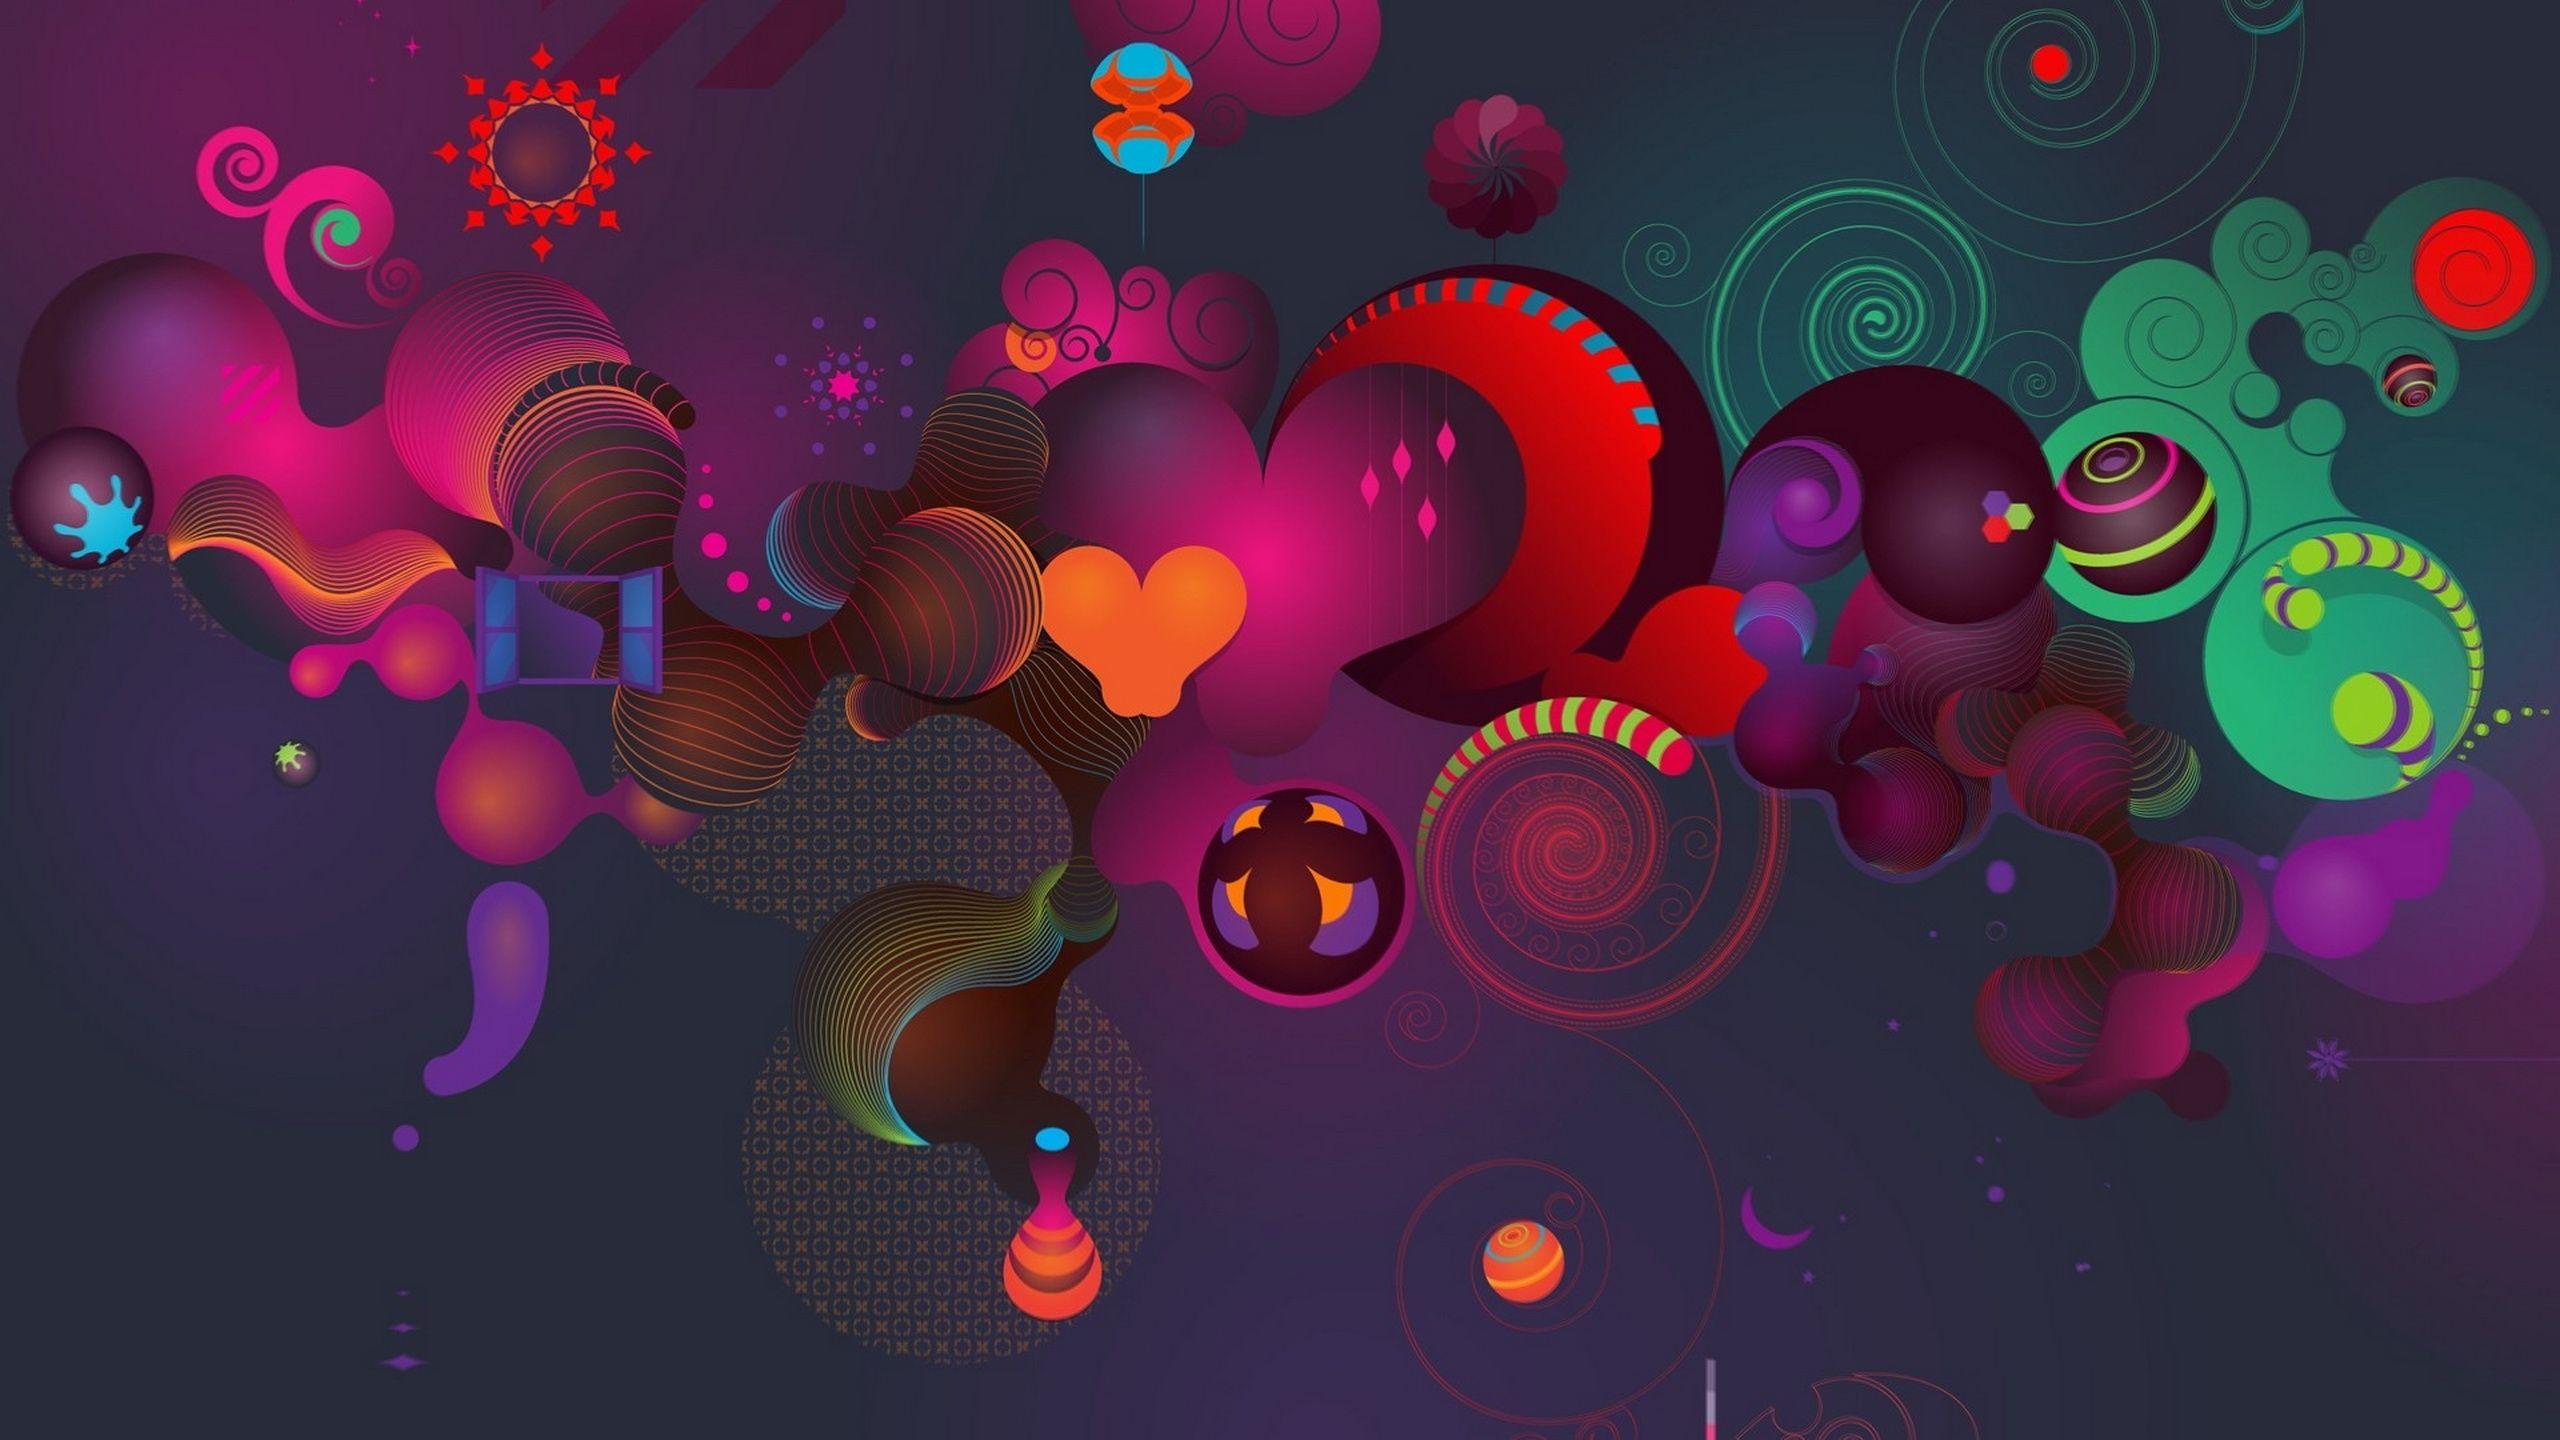 Colorful Love Abstract Background For Desktop Wallpaper. Art wallpaper, Abstract wallpaper, Love wallpaper